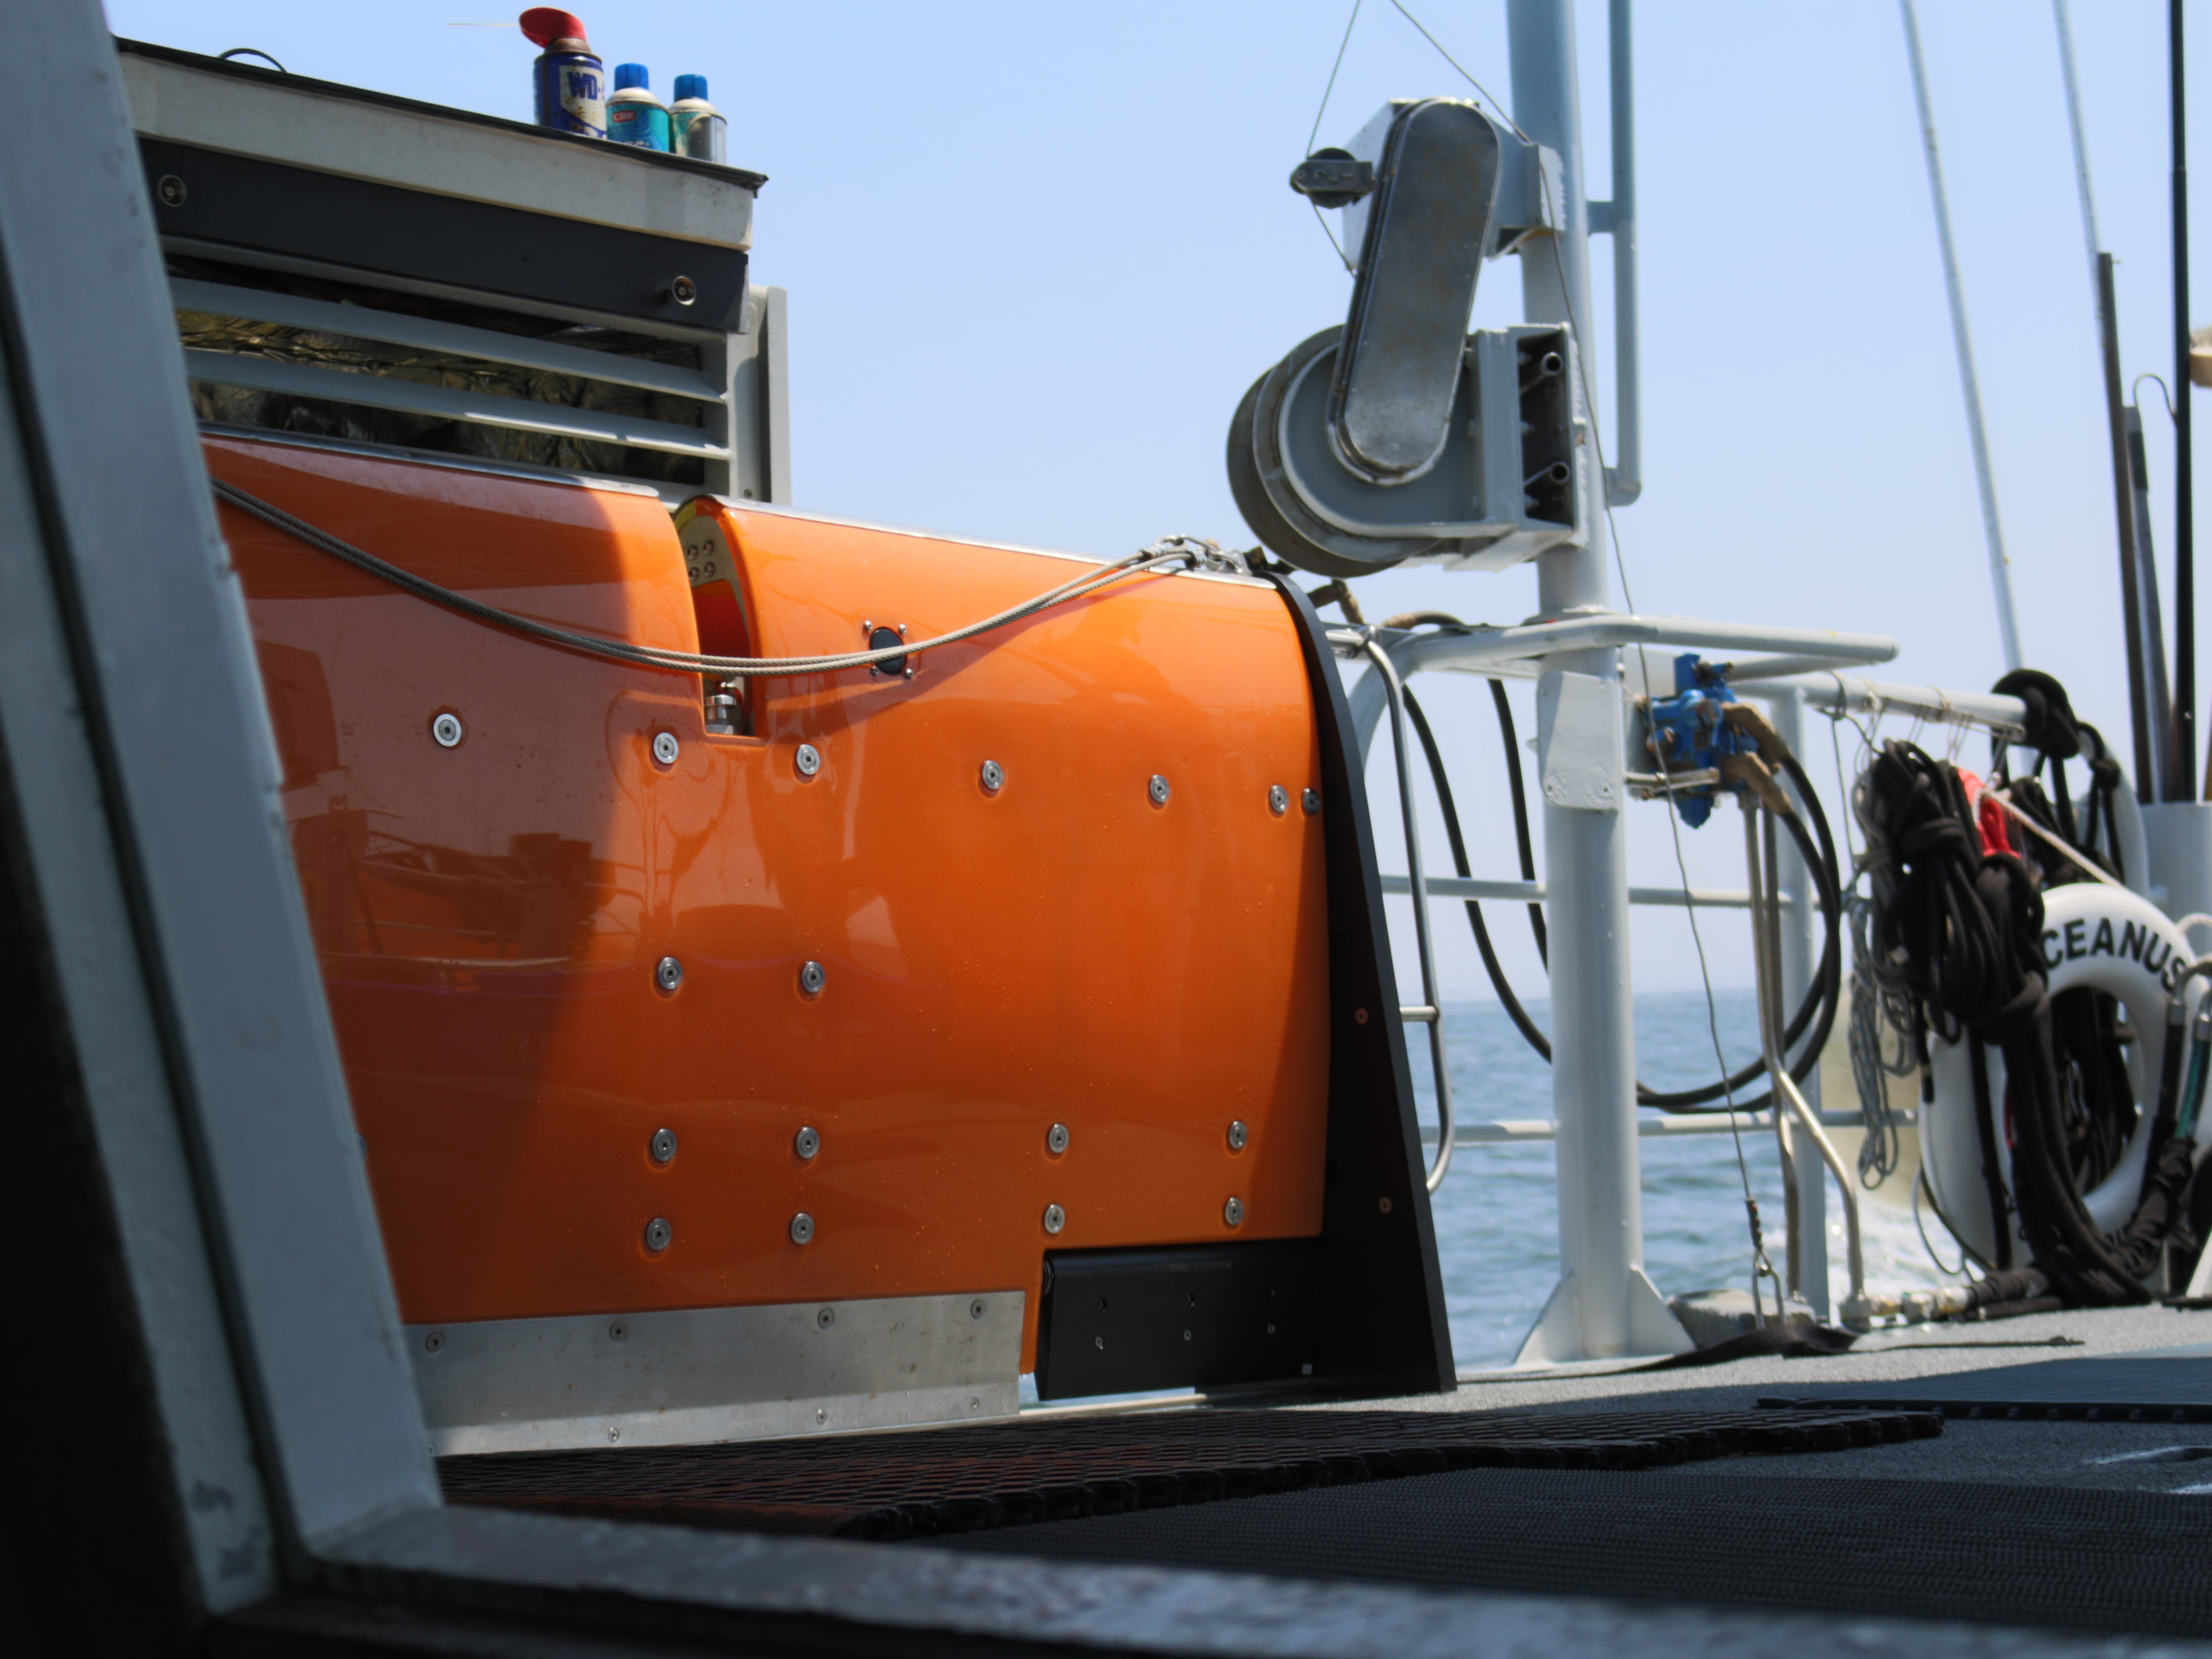 The Scanfish, a remotely operated towed vehicle sits on the aft deck before deployment. This instrument enhances the collection of water quality data and provides high-resolution maps of plume dispersion and location.